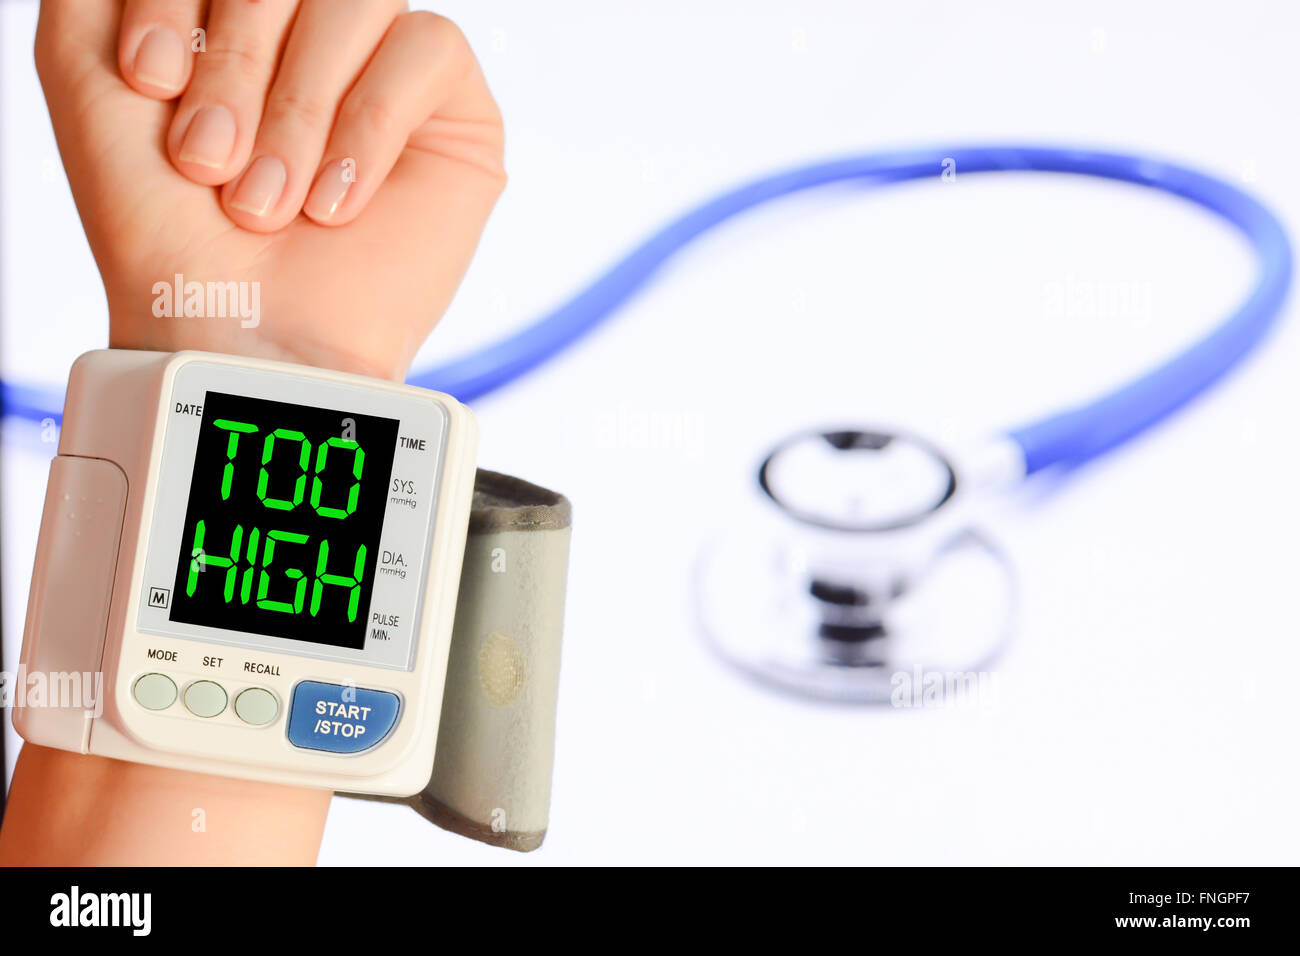 https://c8.alamy.com/comp/FNGPF7/check-your-blood-pressure-and-pulse-to-prevent-heart-problems-FNGPF7.jpg